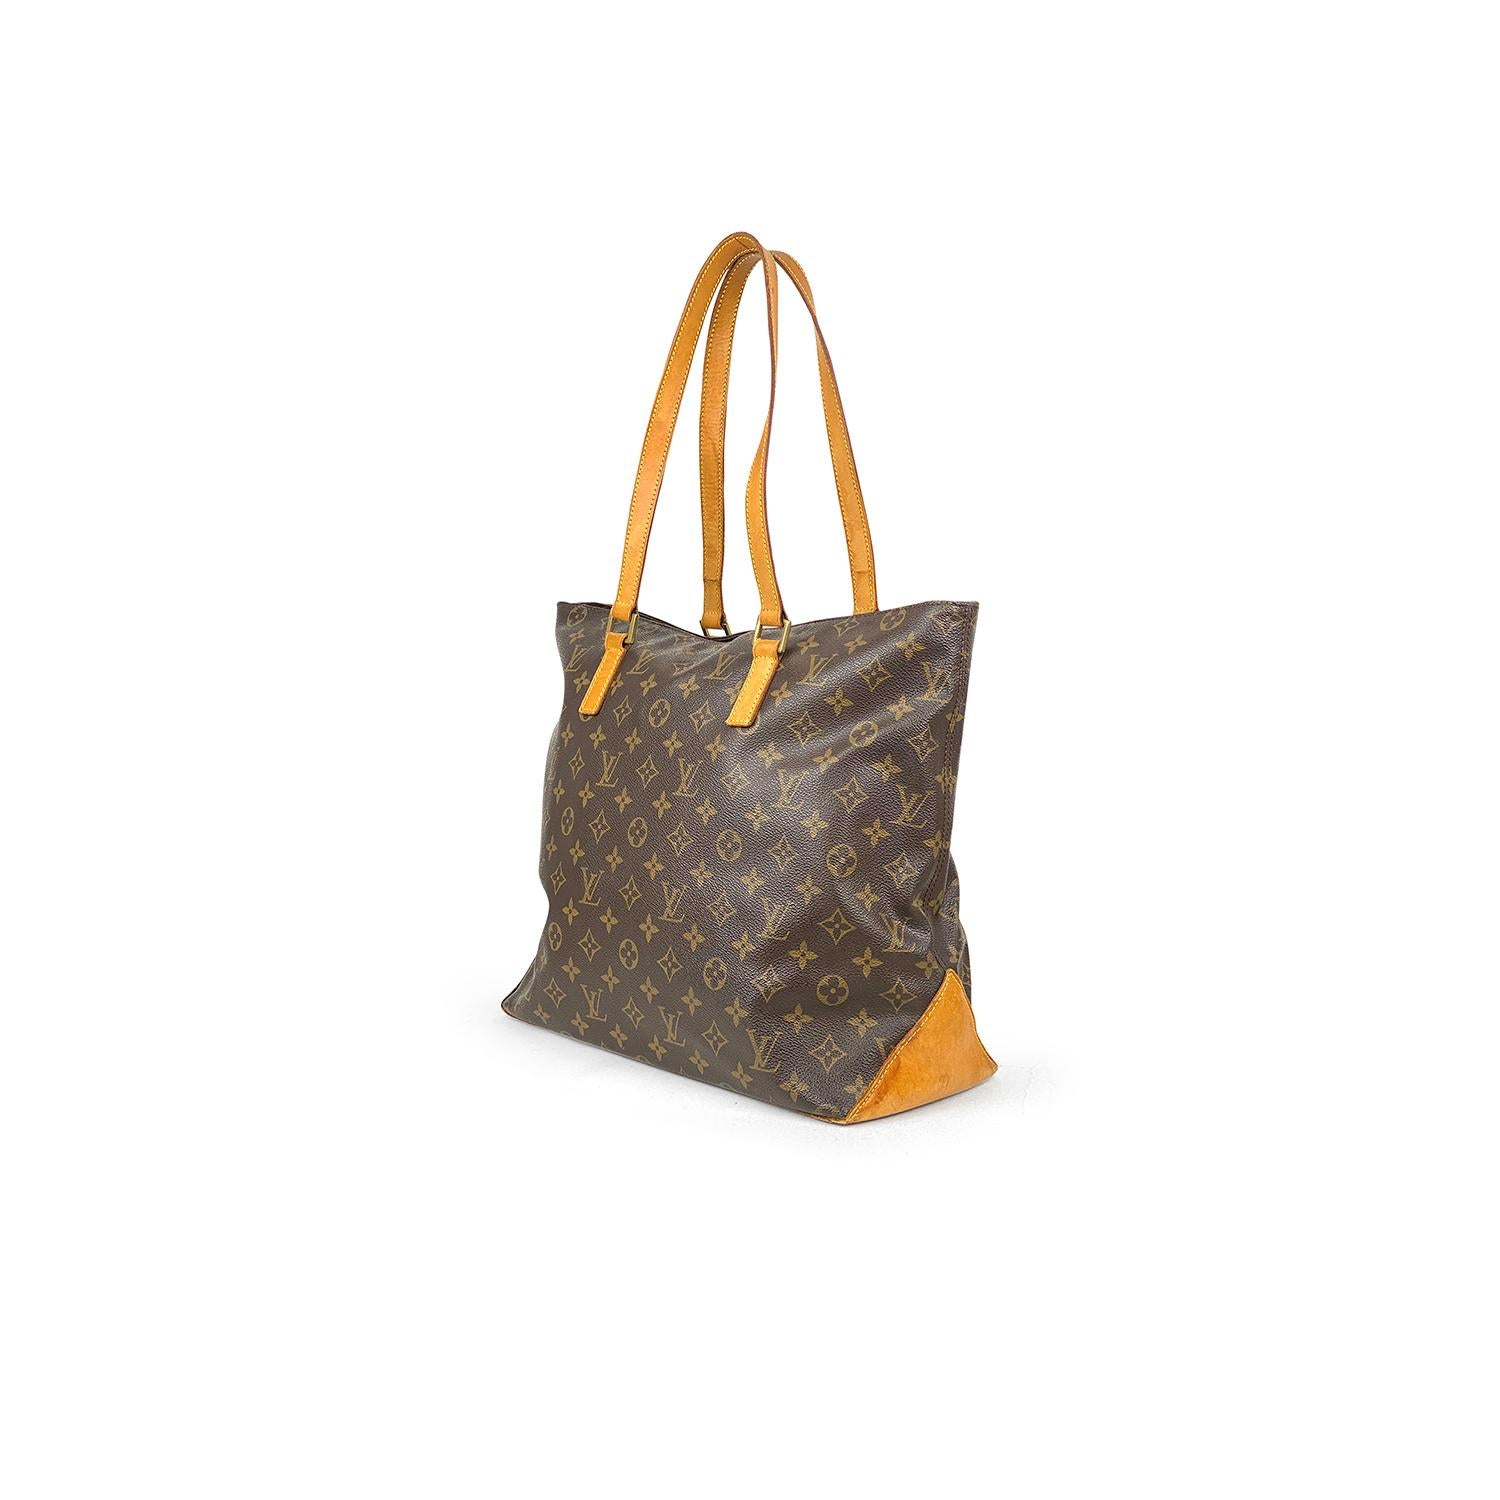 Brown and tan monogram coated canvas Louis Vuitton Cabas Mezzo with

- Brass hardware
- Tan vachetta leather trim
- Dual flat shoulder straps
- Brown canvas lining, single zip pocket at interior wall and zip closure at top

Overall Preloved